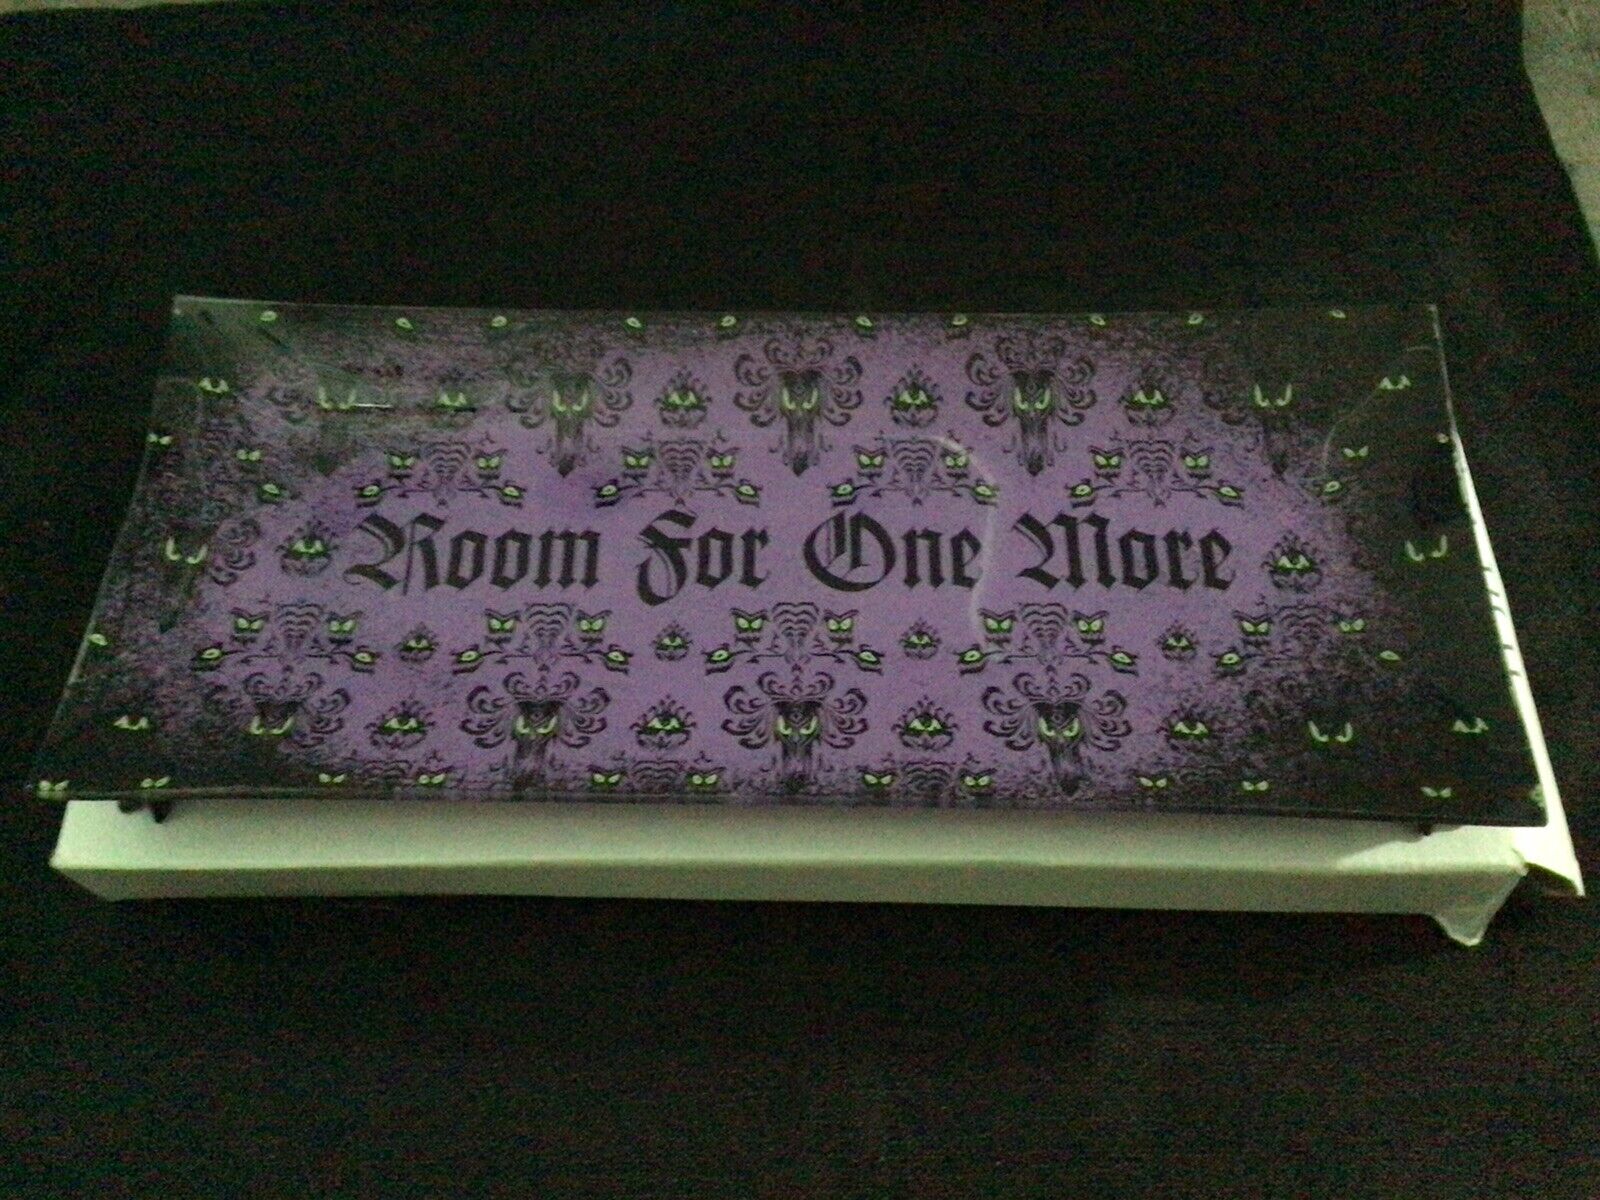 Disney Haunted Mansion “ Room For One More” Glass Dish Brand New